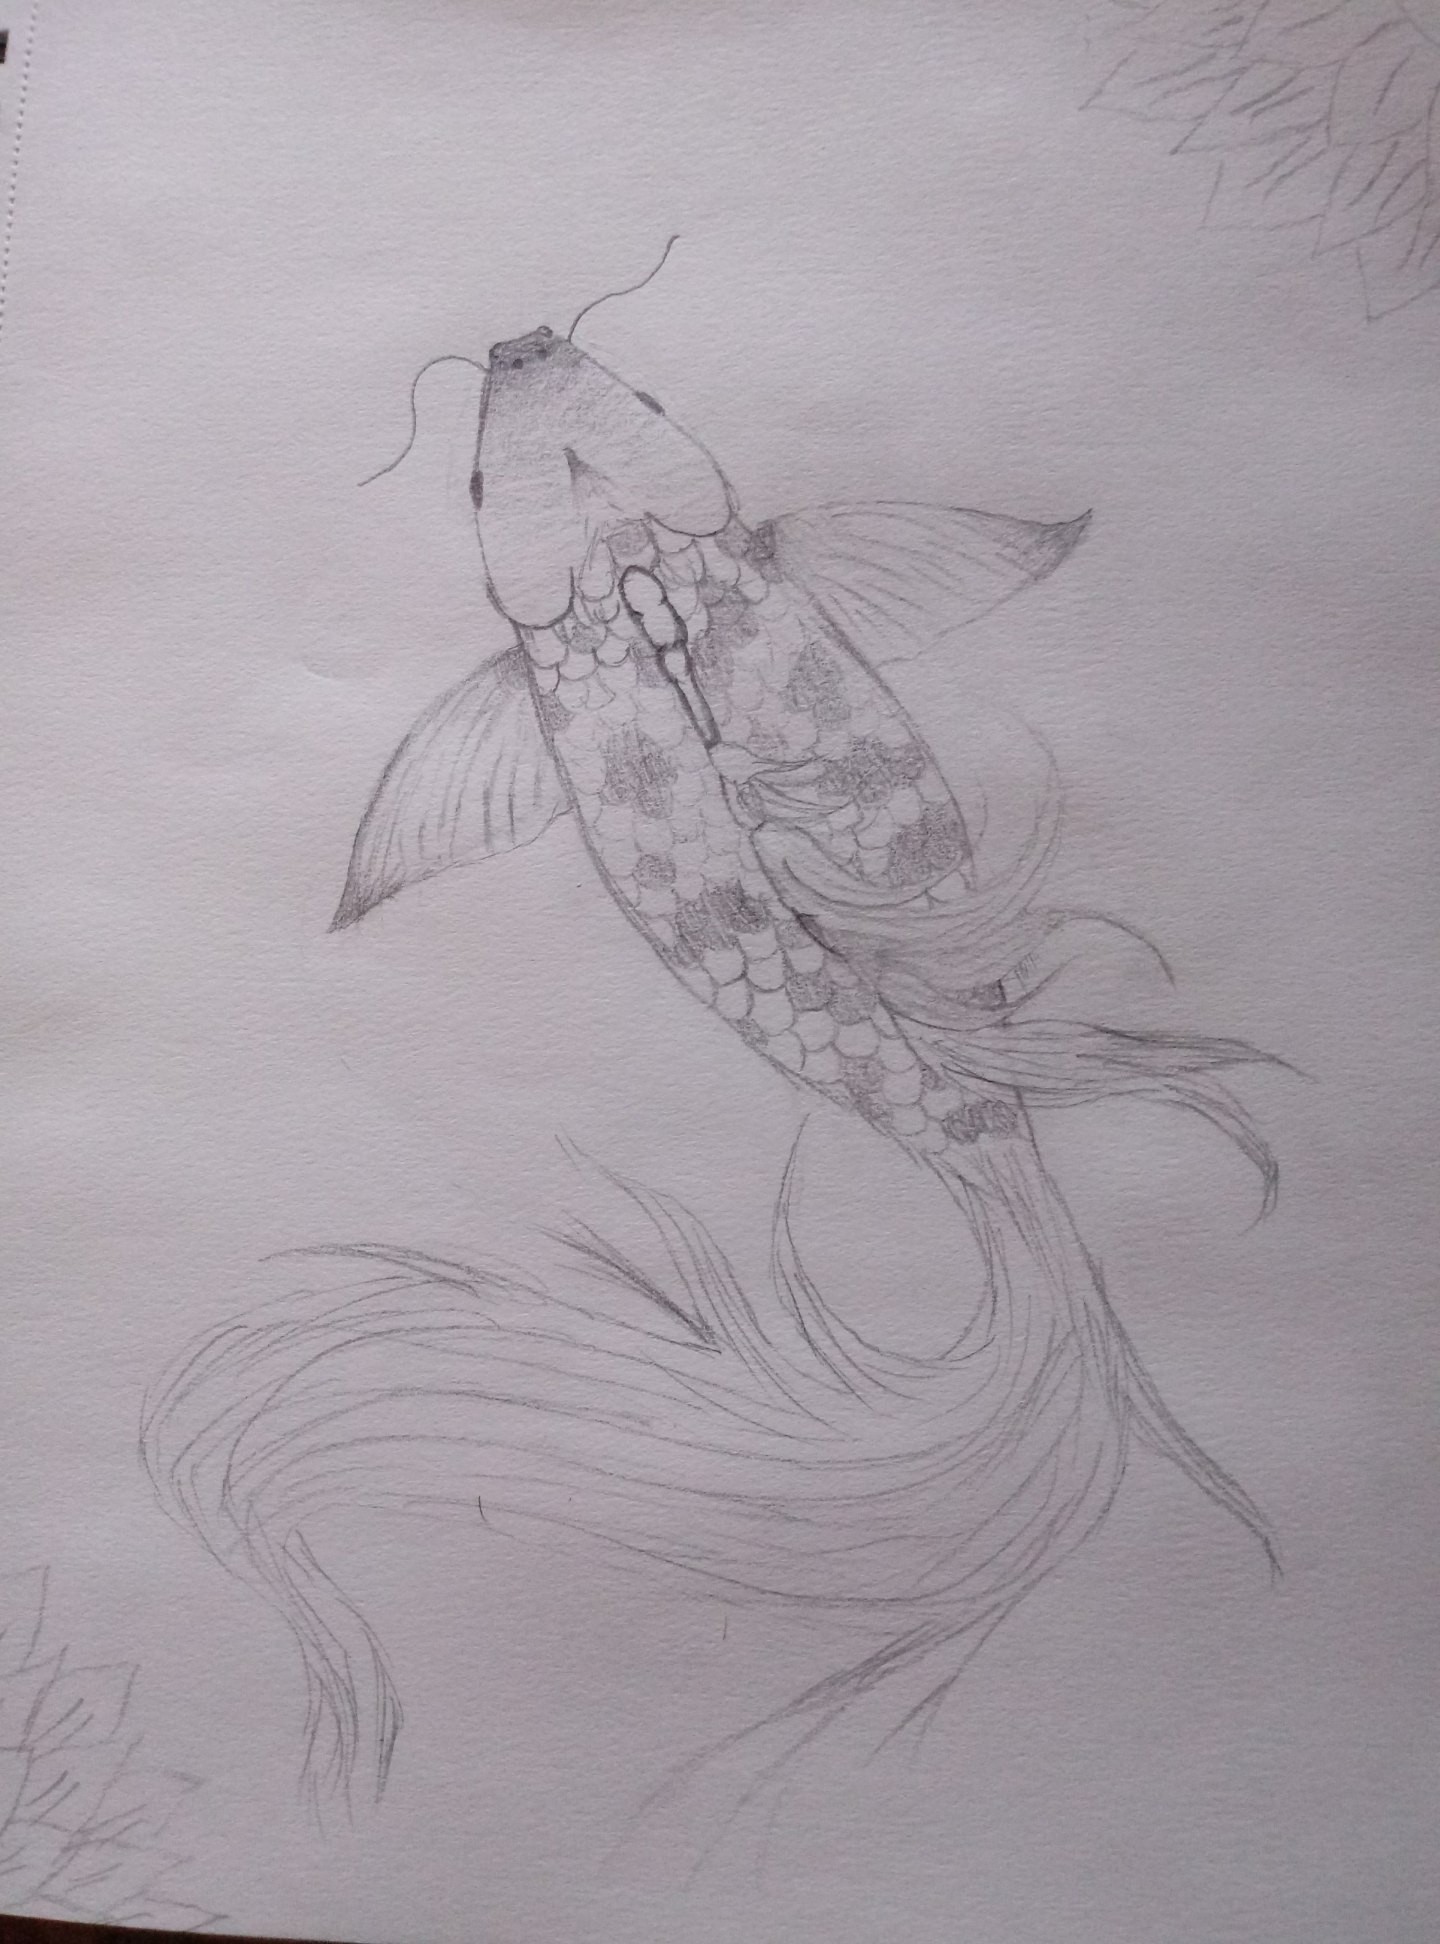 A pencil drawing of a fish. Its tail is flowing